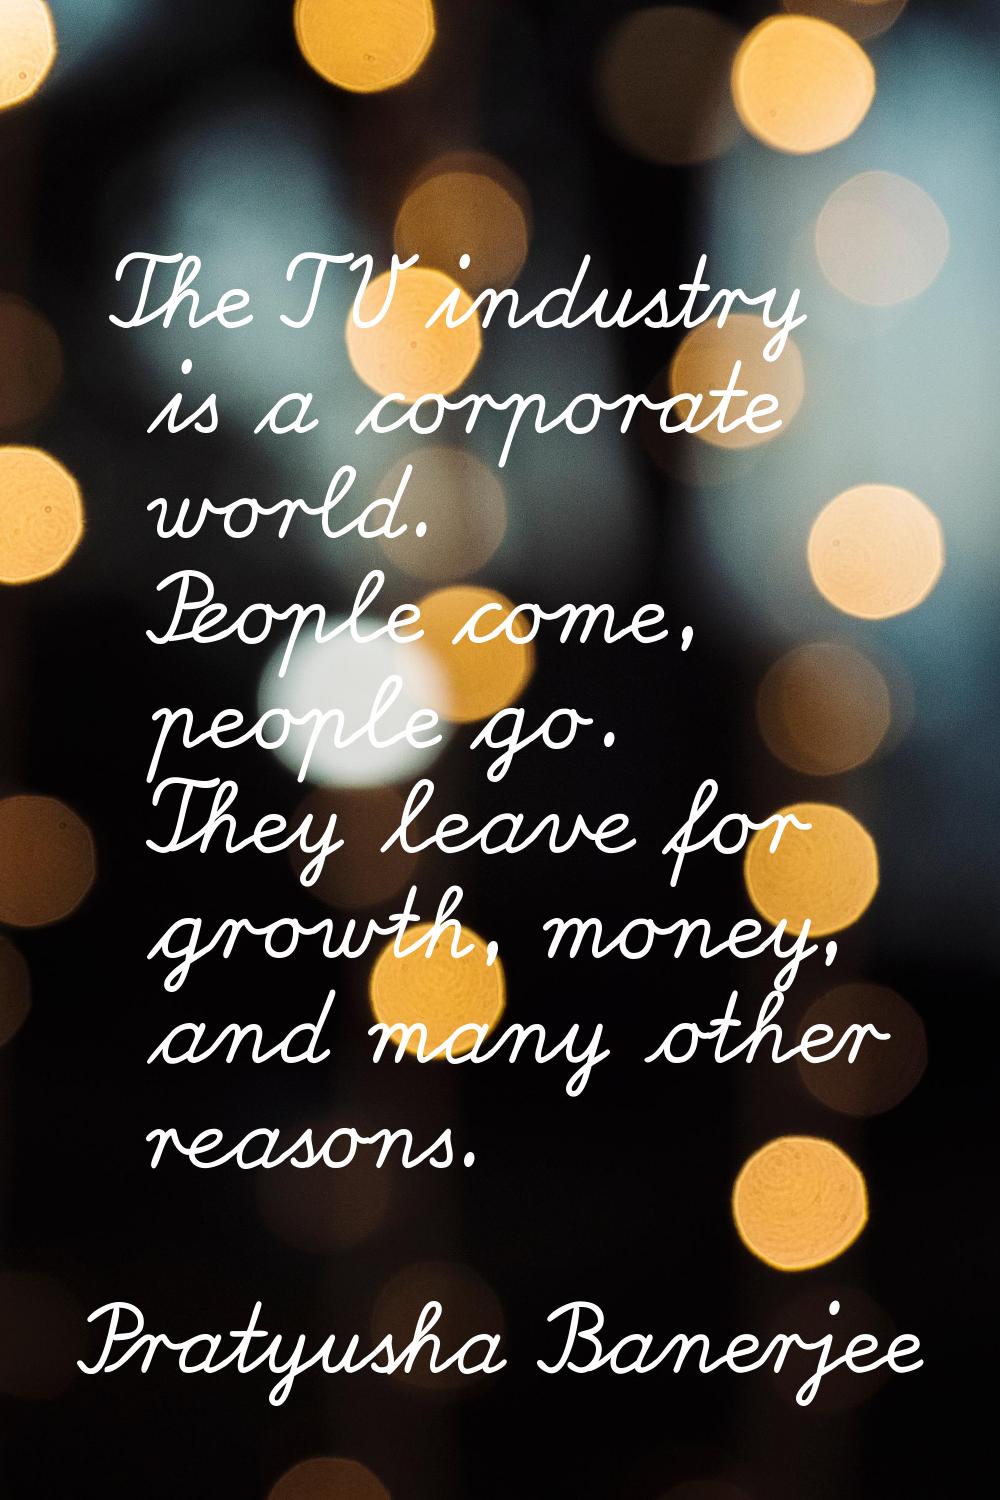 The TV industry is a corporate world. People come, people go. They leave for growth, money, and man